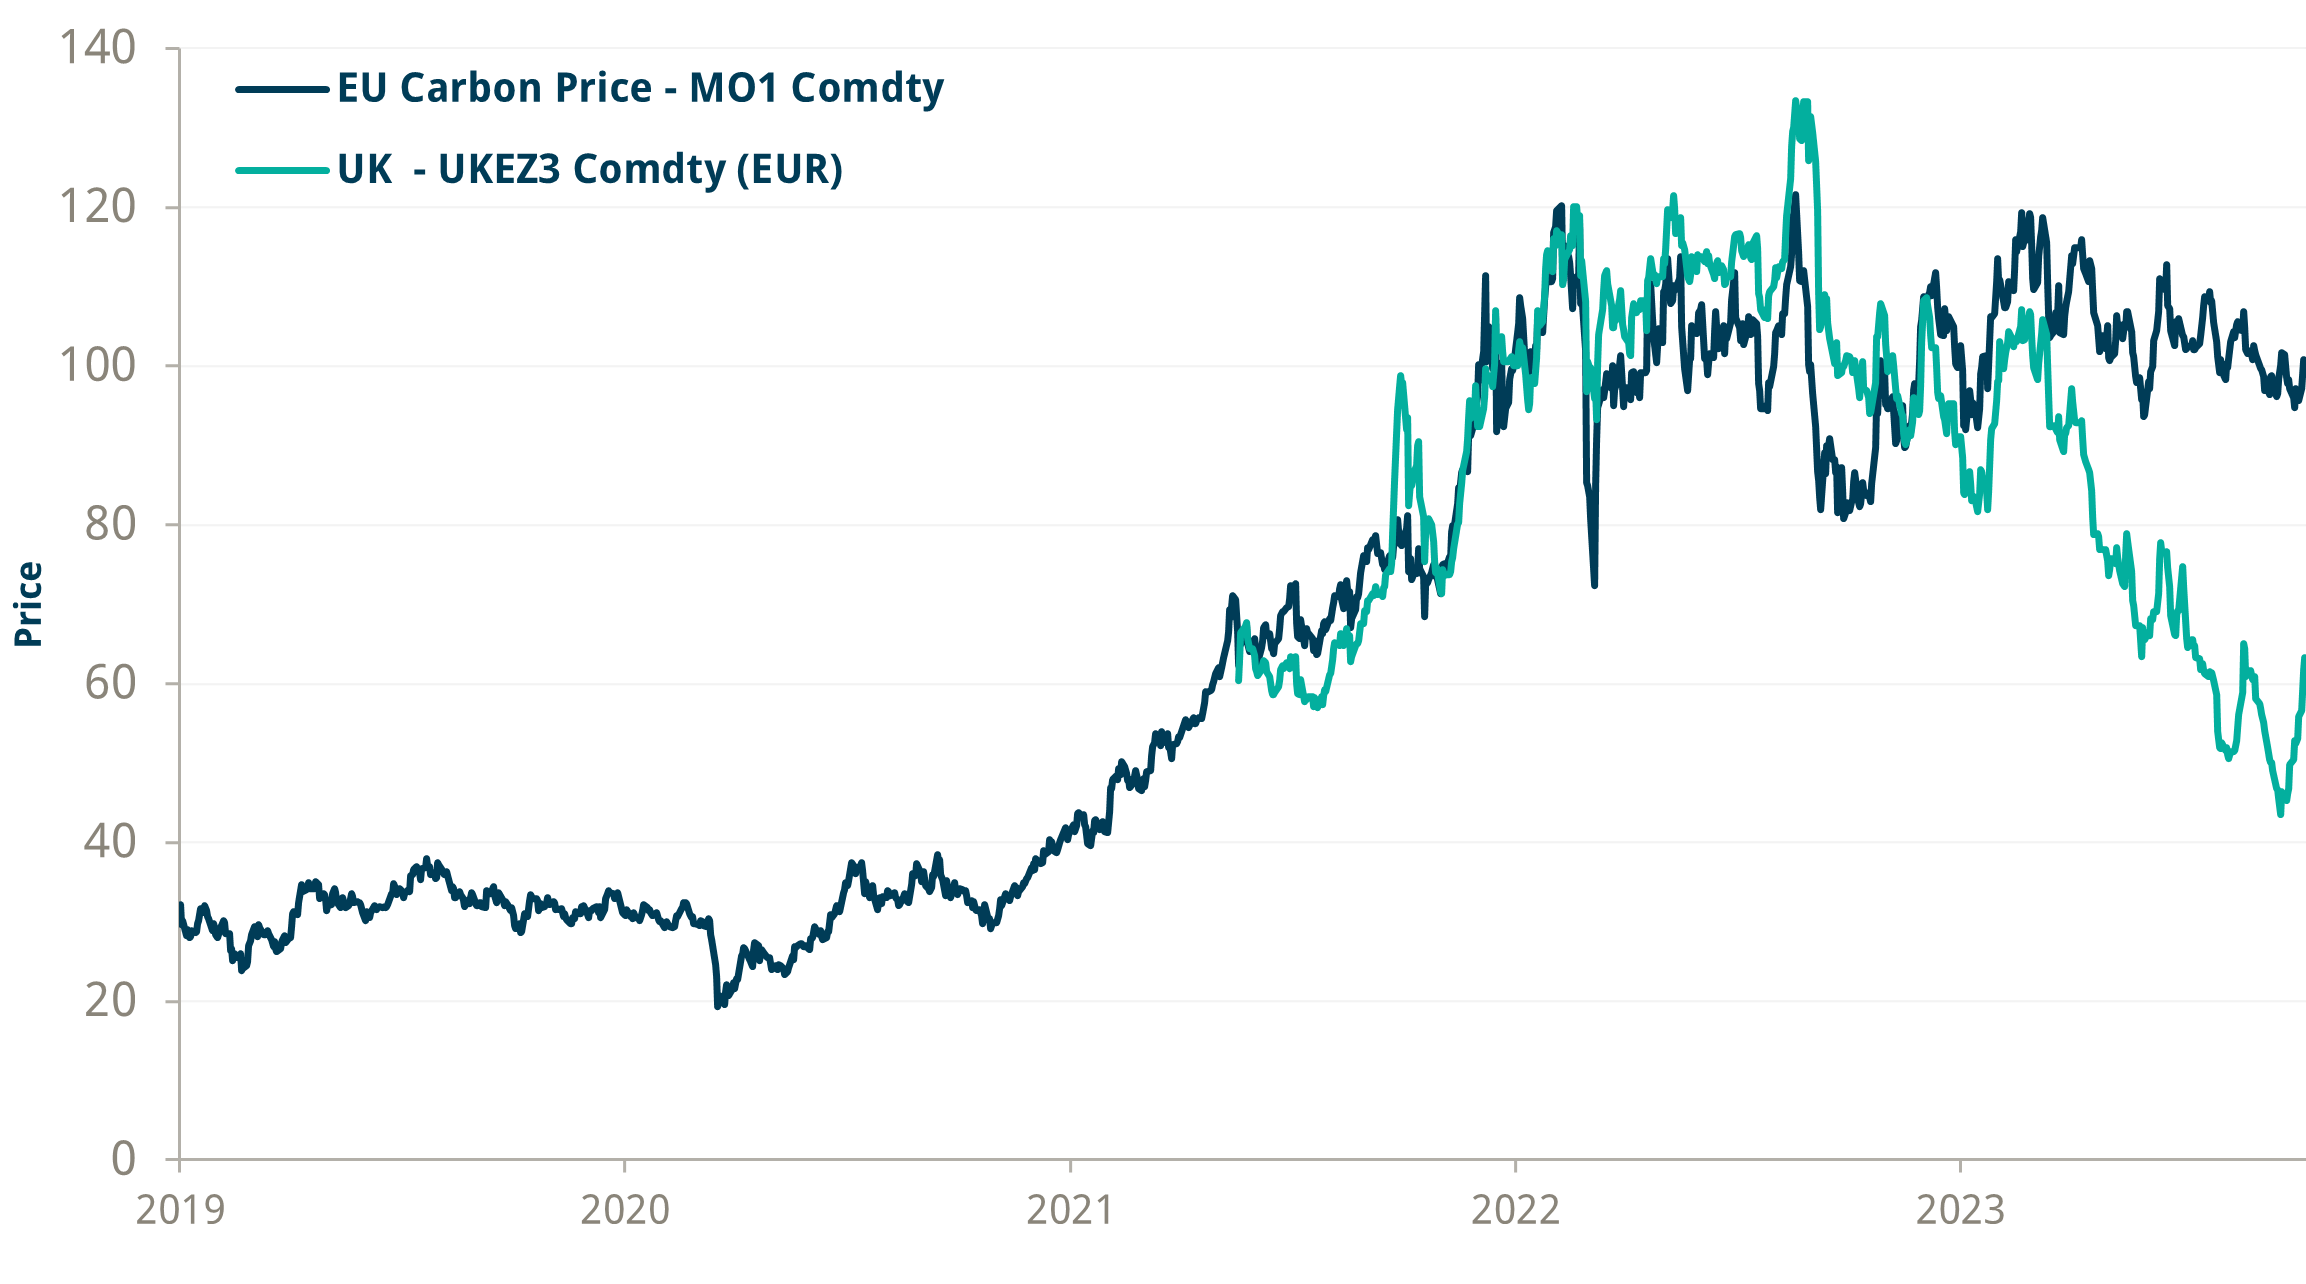 Precedent from other schemes - UK carbon (green) have collapsed while EU prices (blue) stay high 